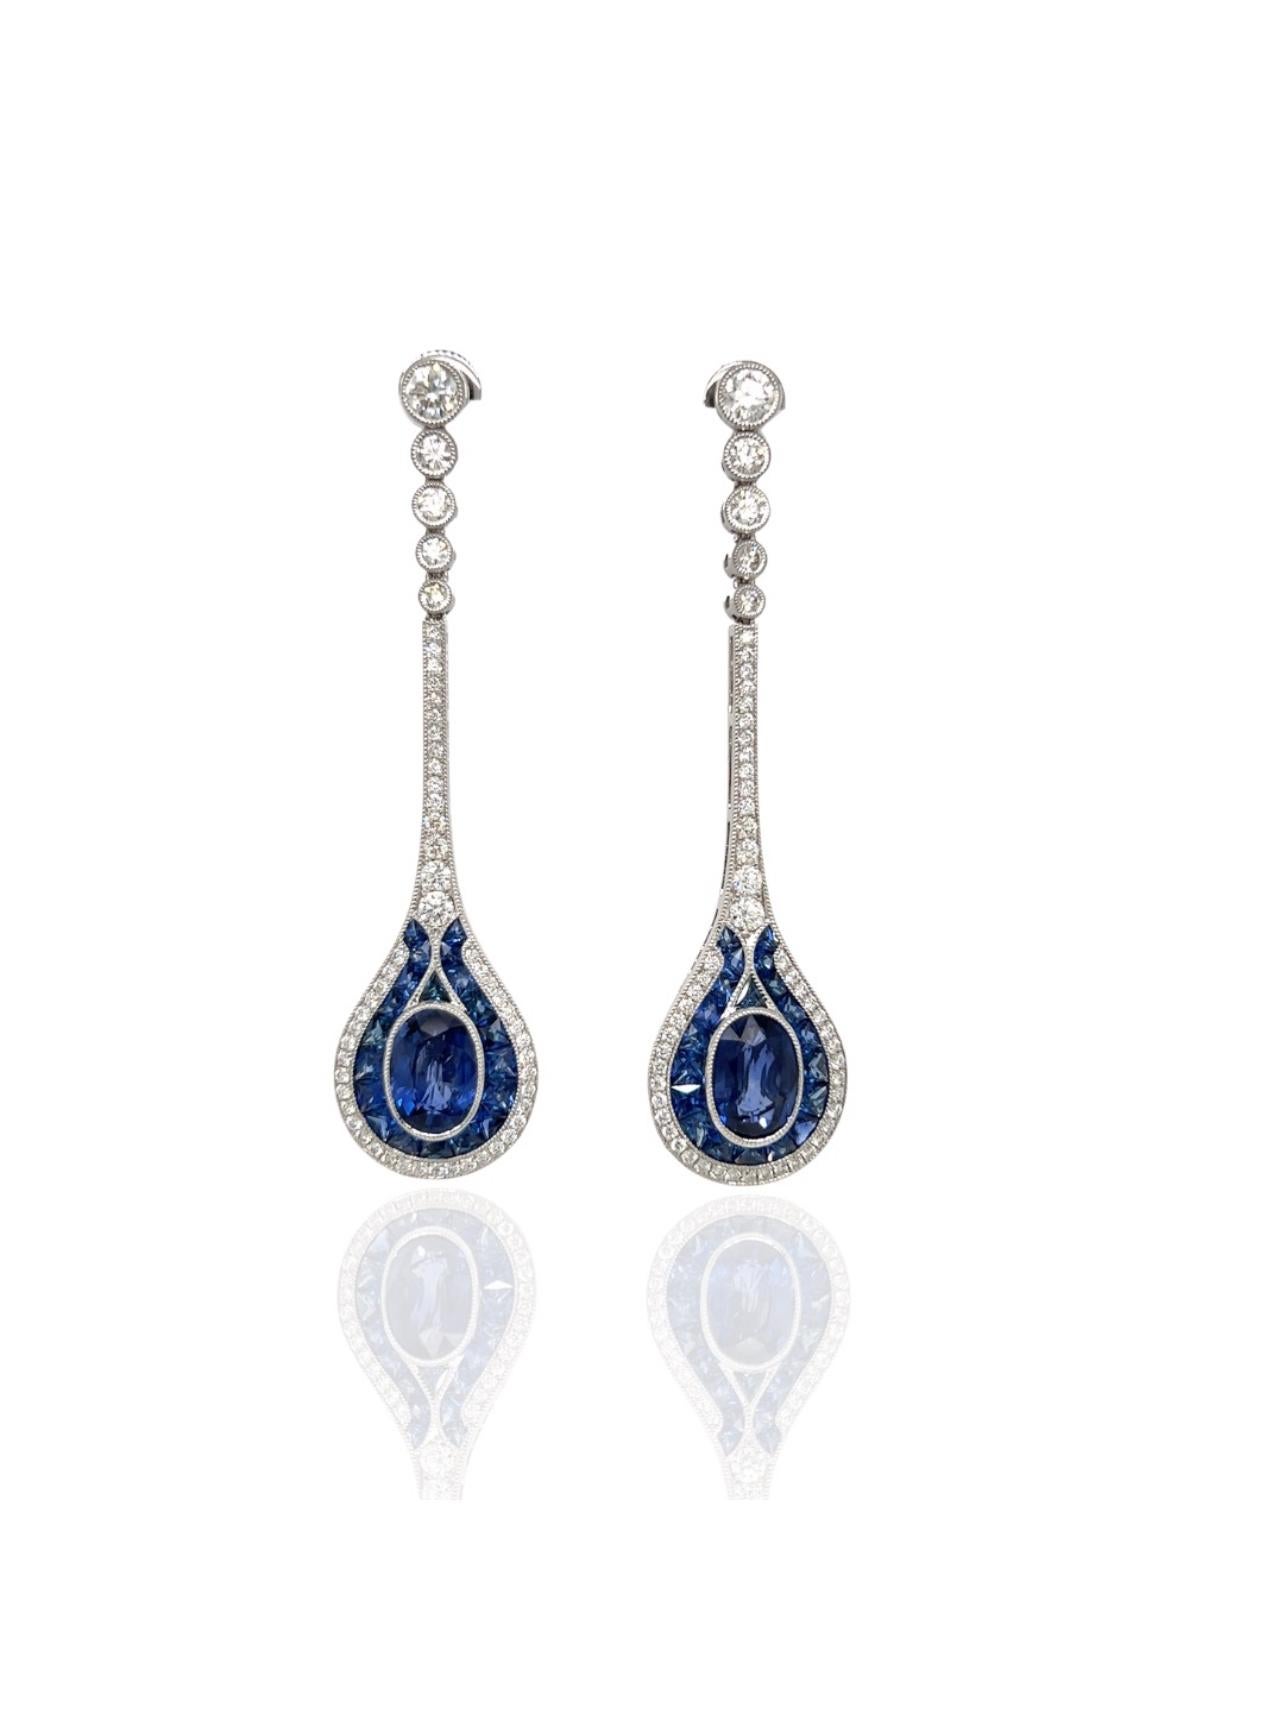 These are magnificient. Beginning with the brilliant round diamonds at the top, expertly set with a milgrain finish to the vibrant blue 3.96 oval fine sapphire, french cut sapphires and the additional diamonds. These dangle earrings are an exquisite